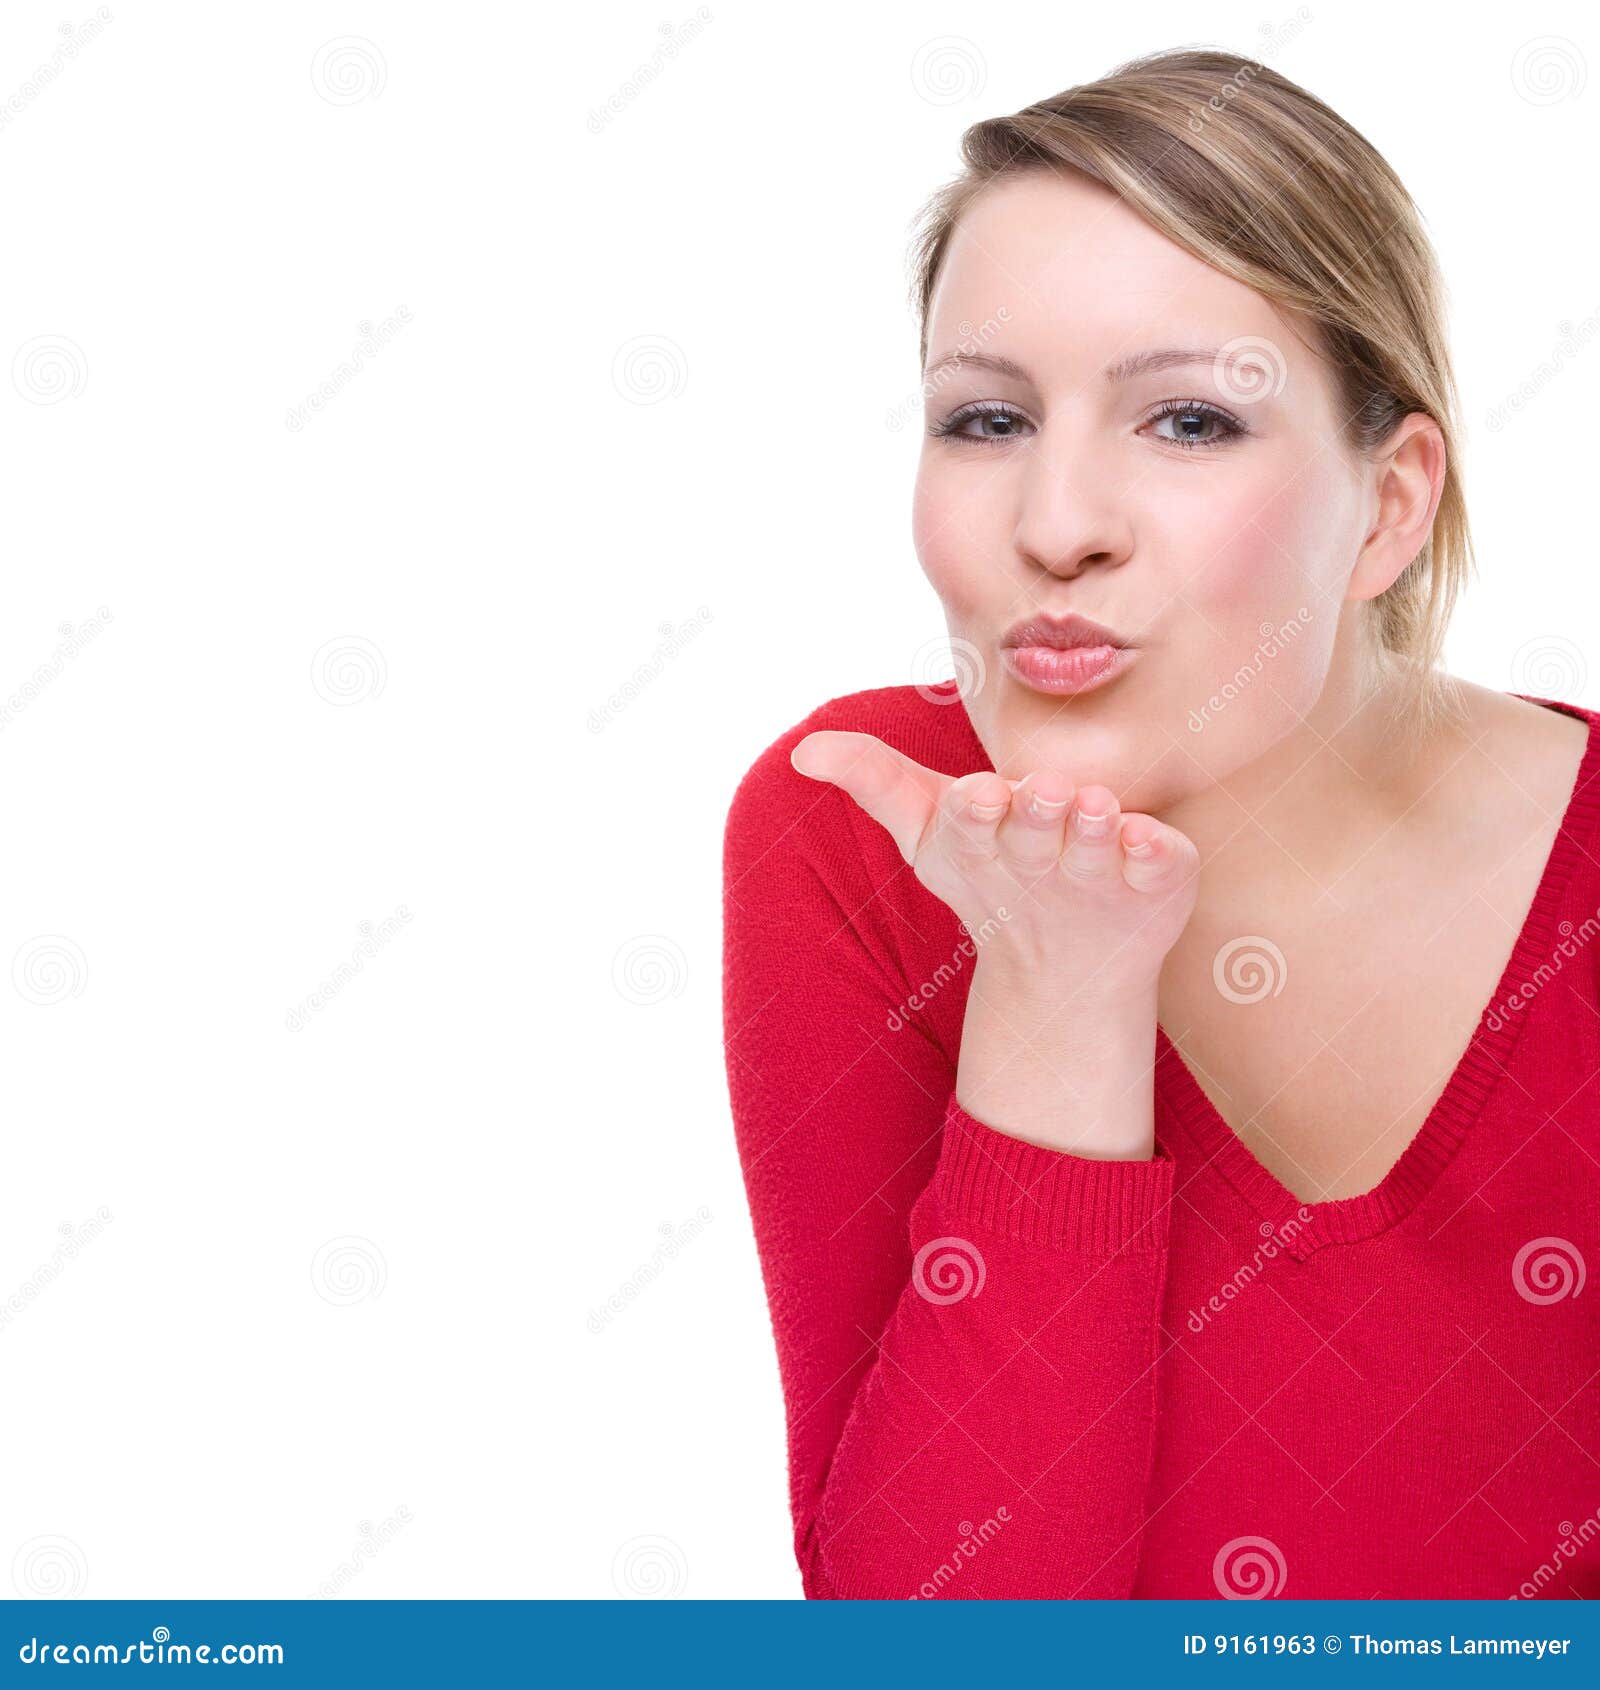 Blowing a kiss stock image. Image of blond, natural, expression - 9161963